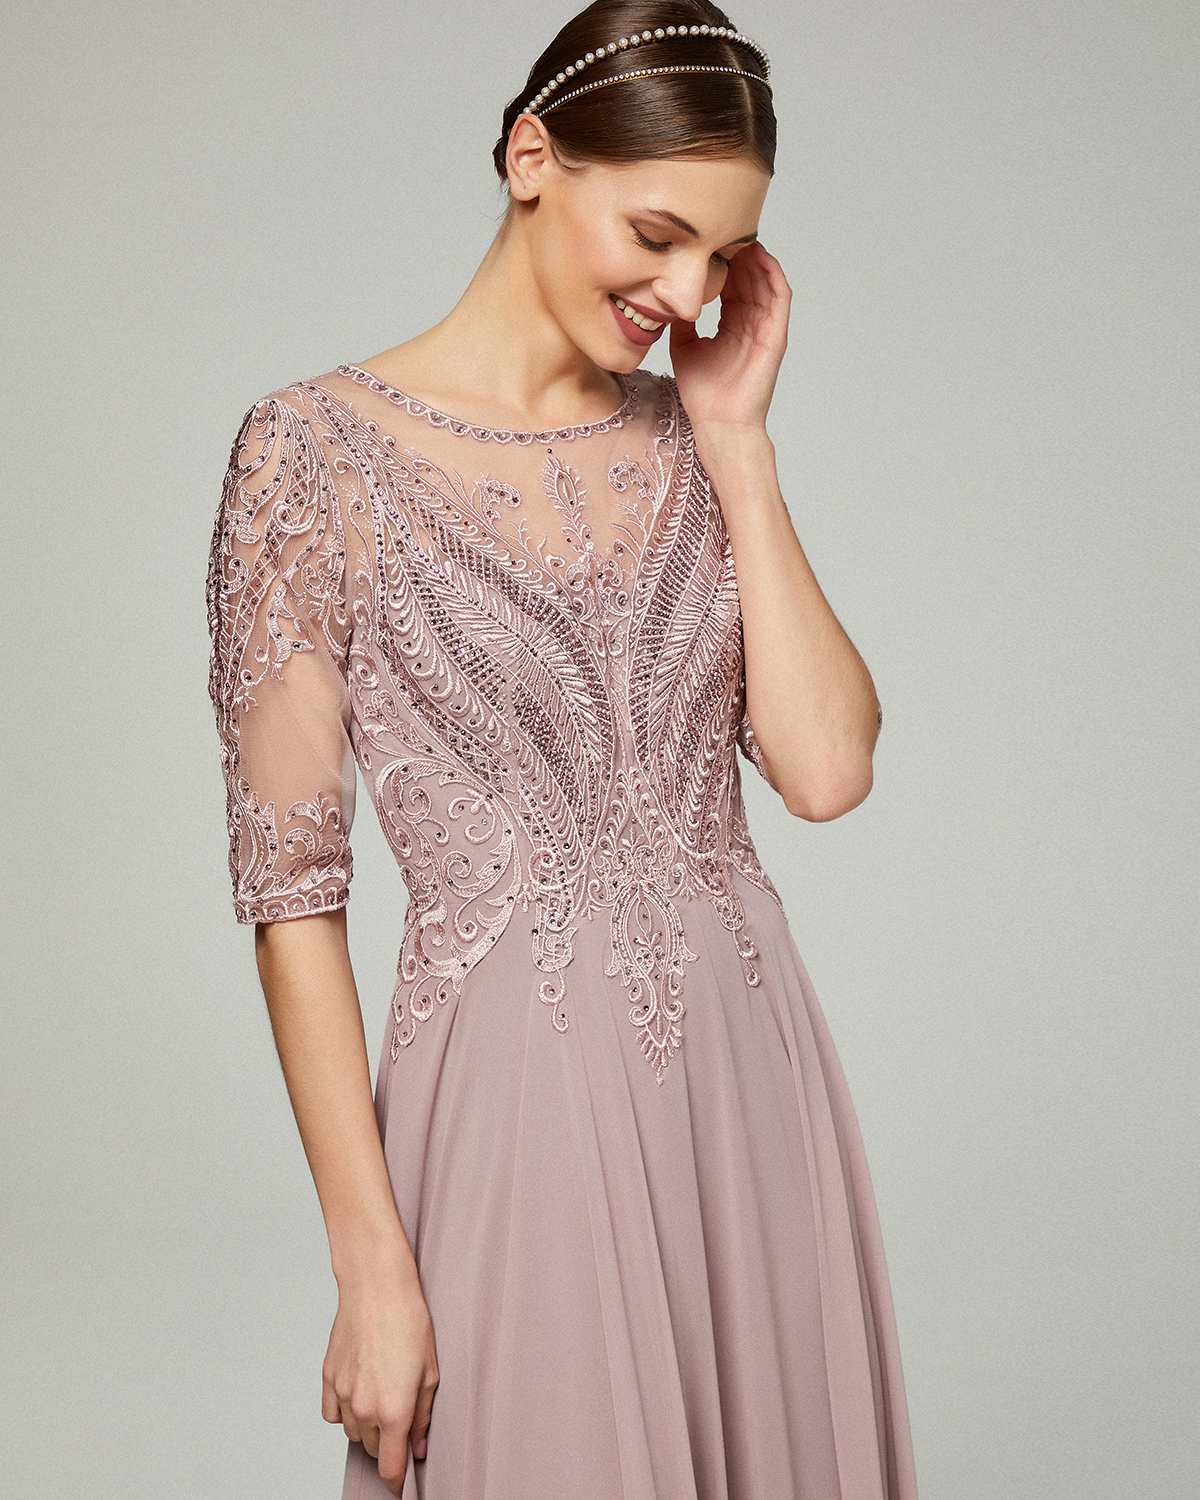 Classic Dresses / Long evening chiffon dress with lace top and sleeves for the mother of the bride